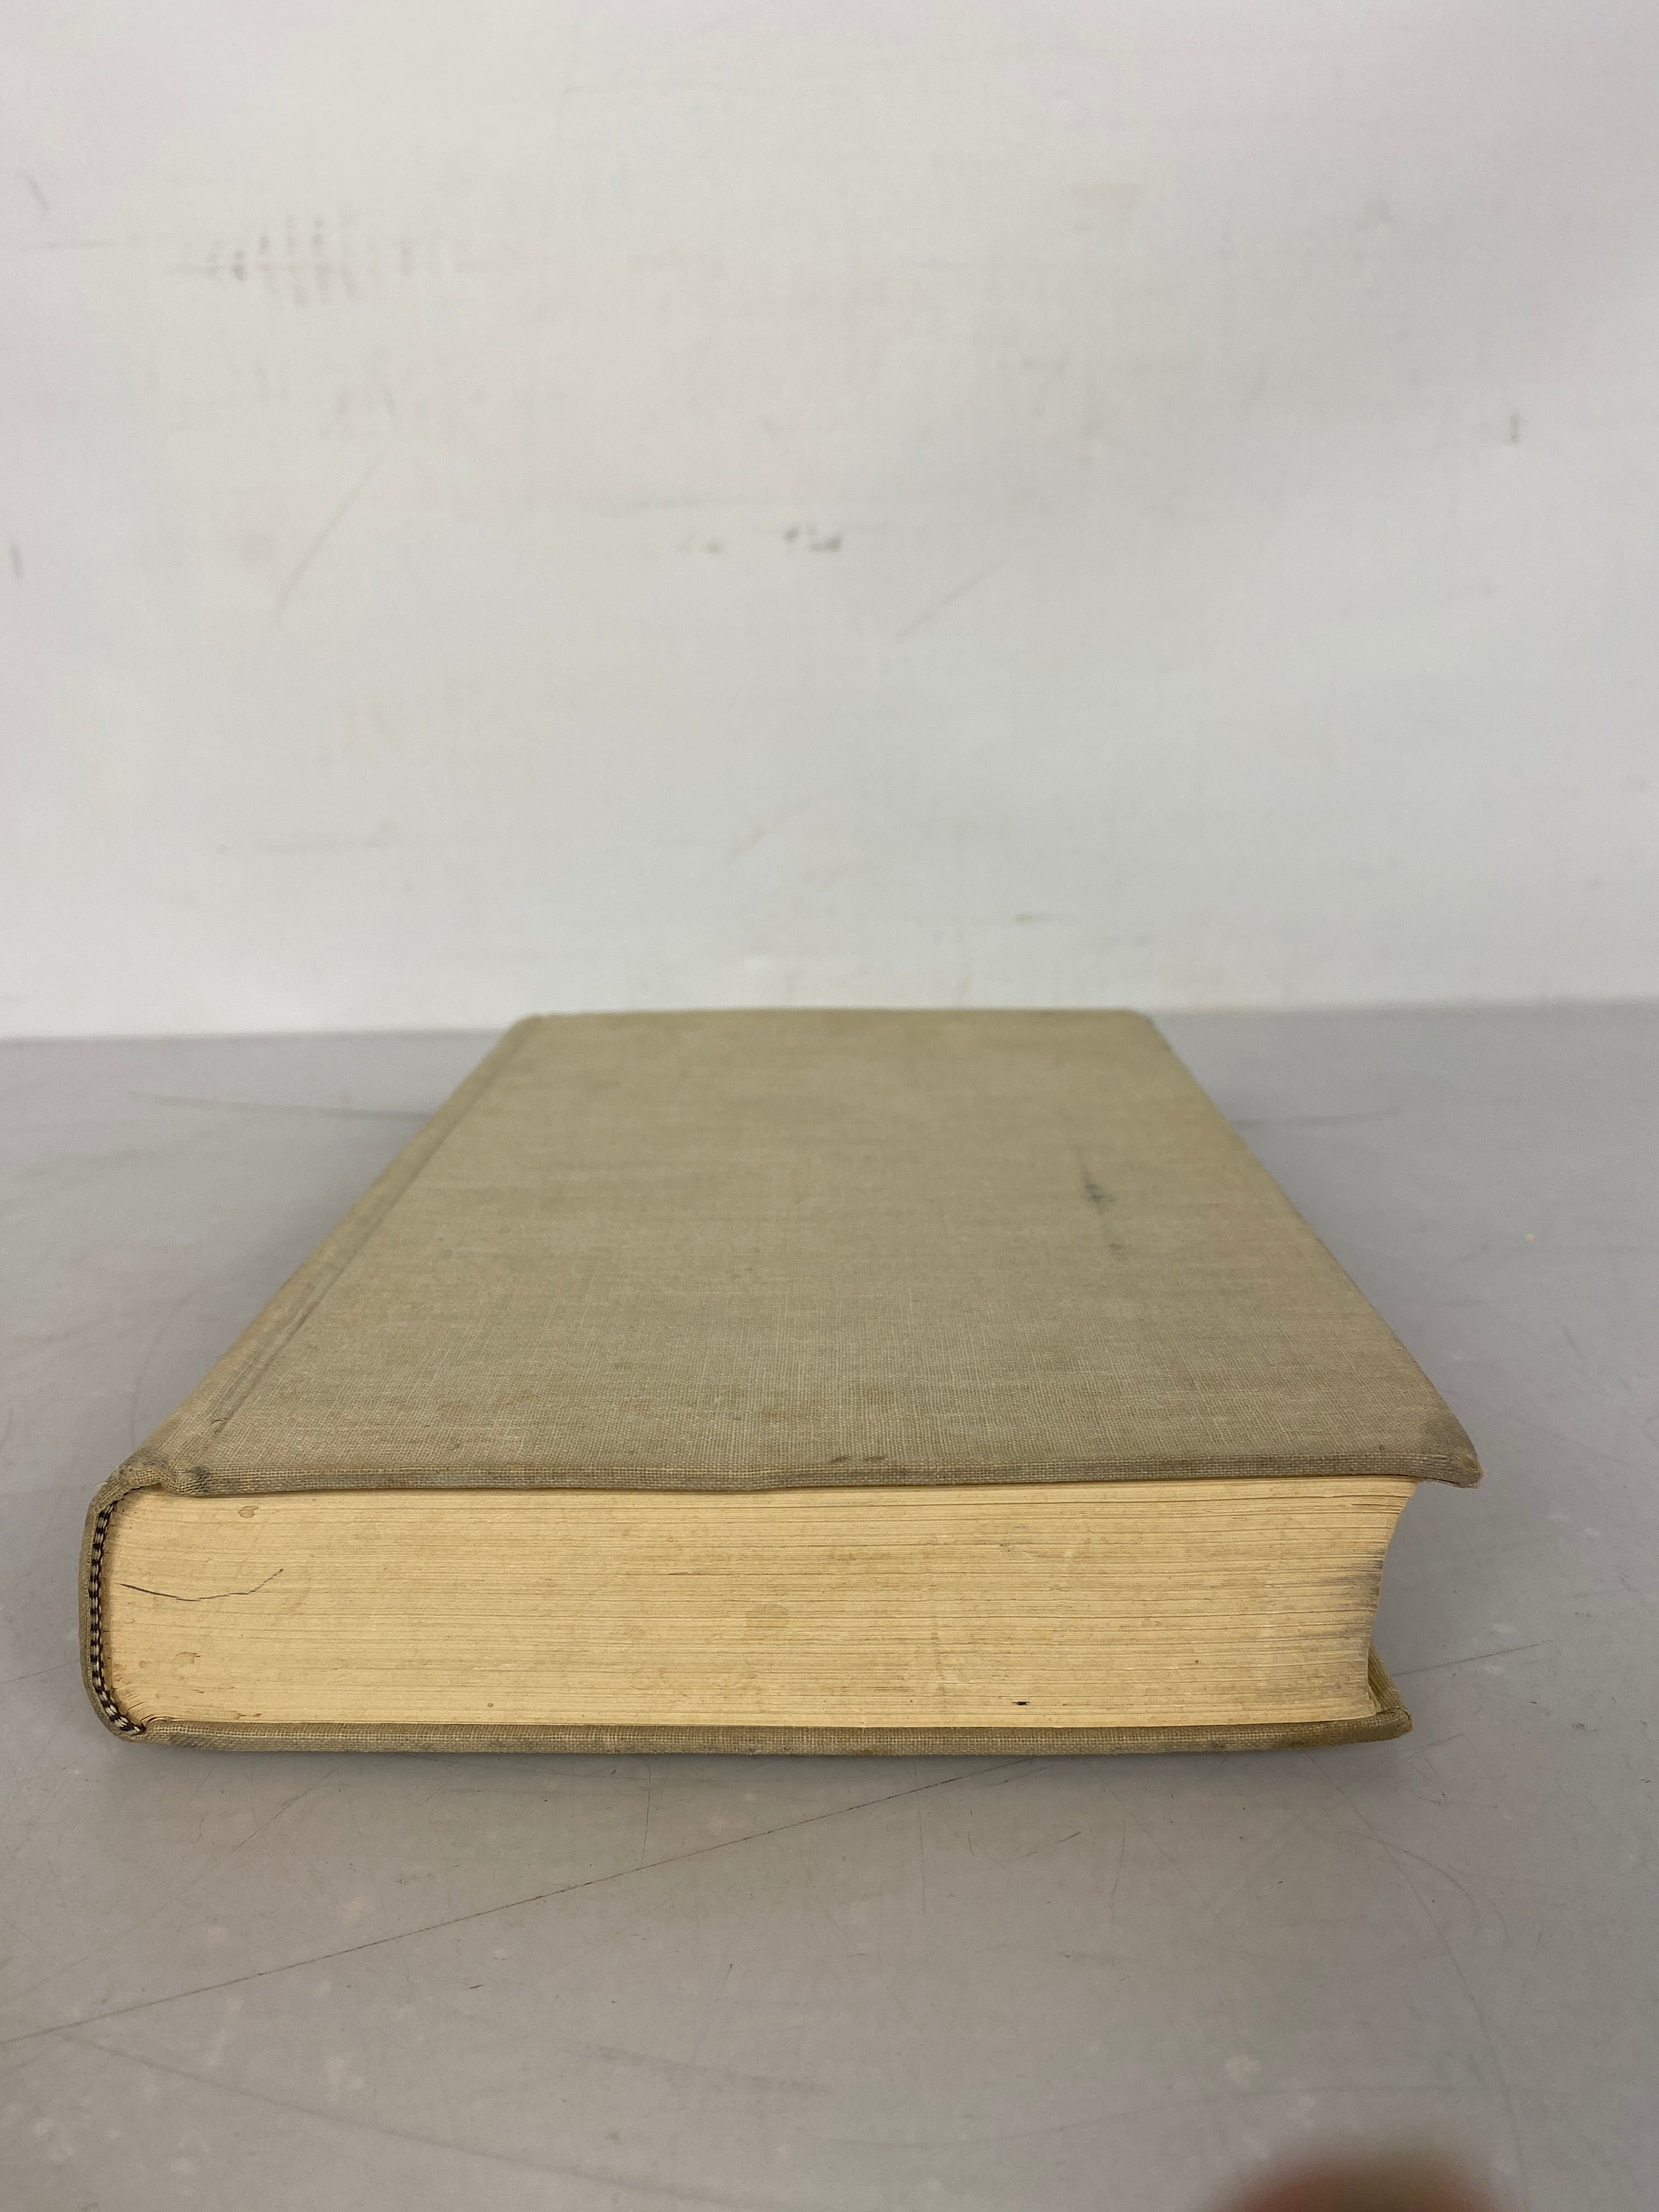 Practical Administration of Public Libraries by Wheeler and Goldhor 1962 HC